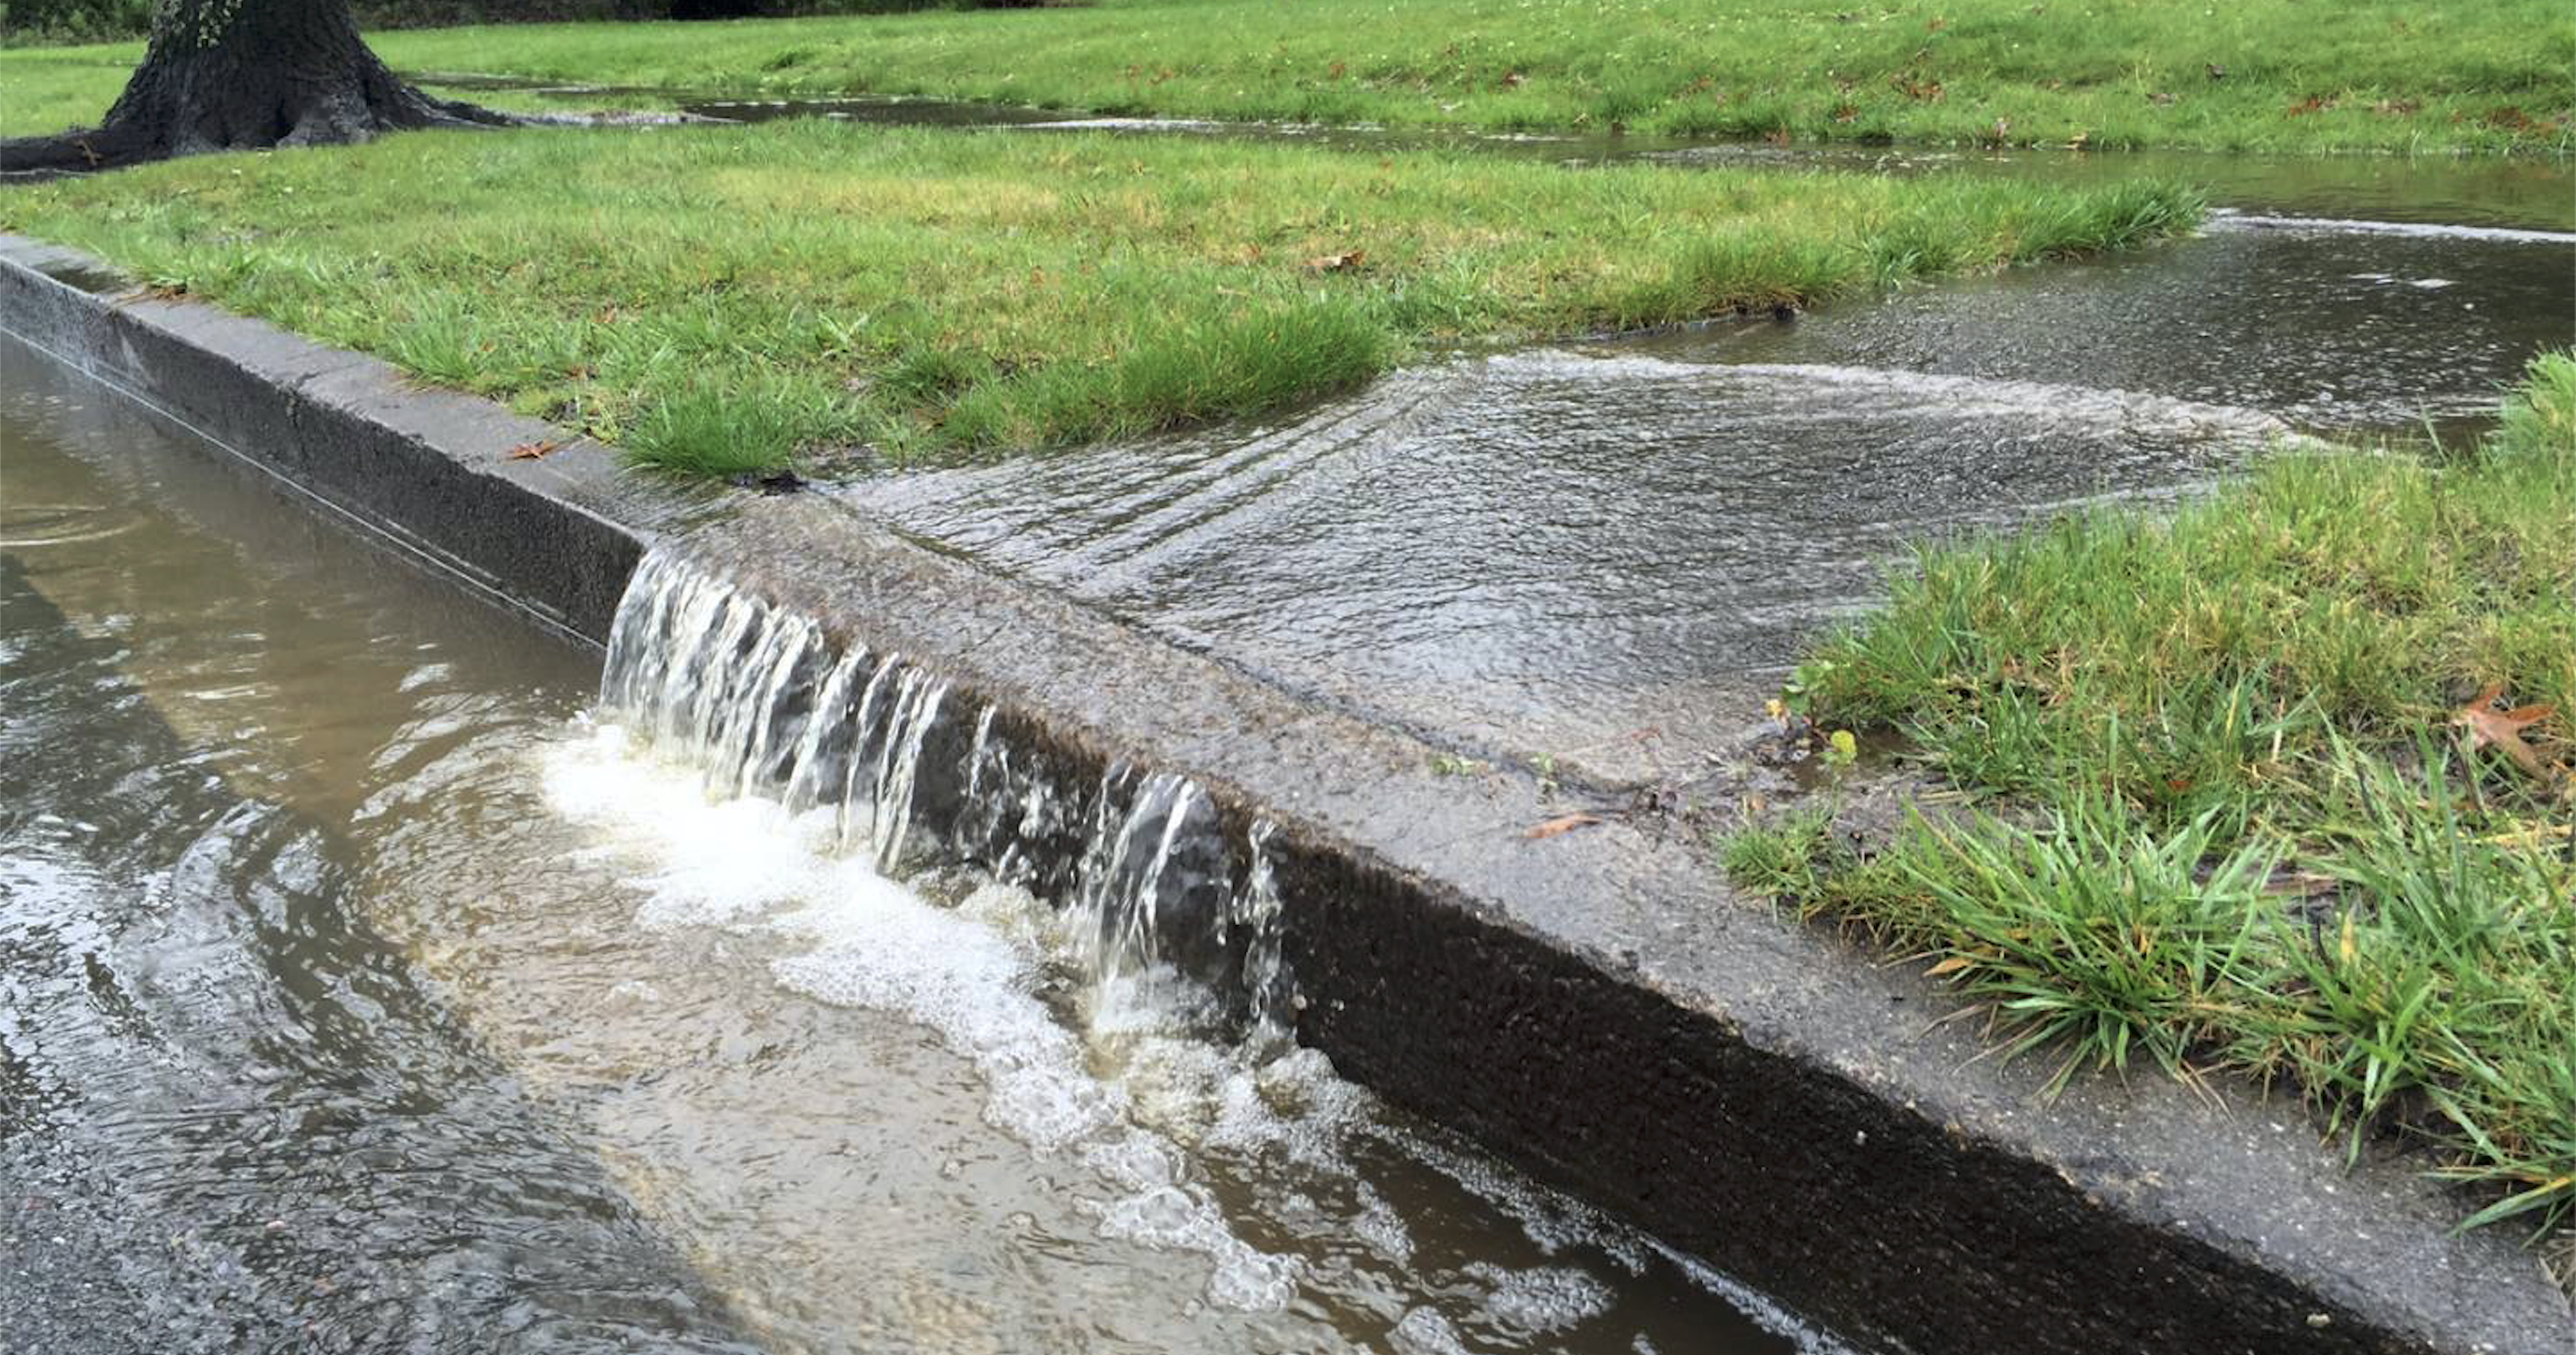 Stormwater runs off a sidewalk in a residential area